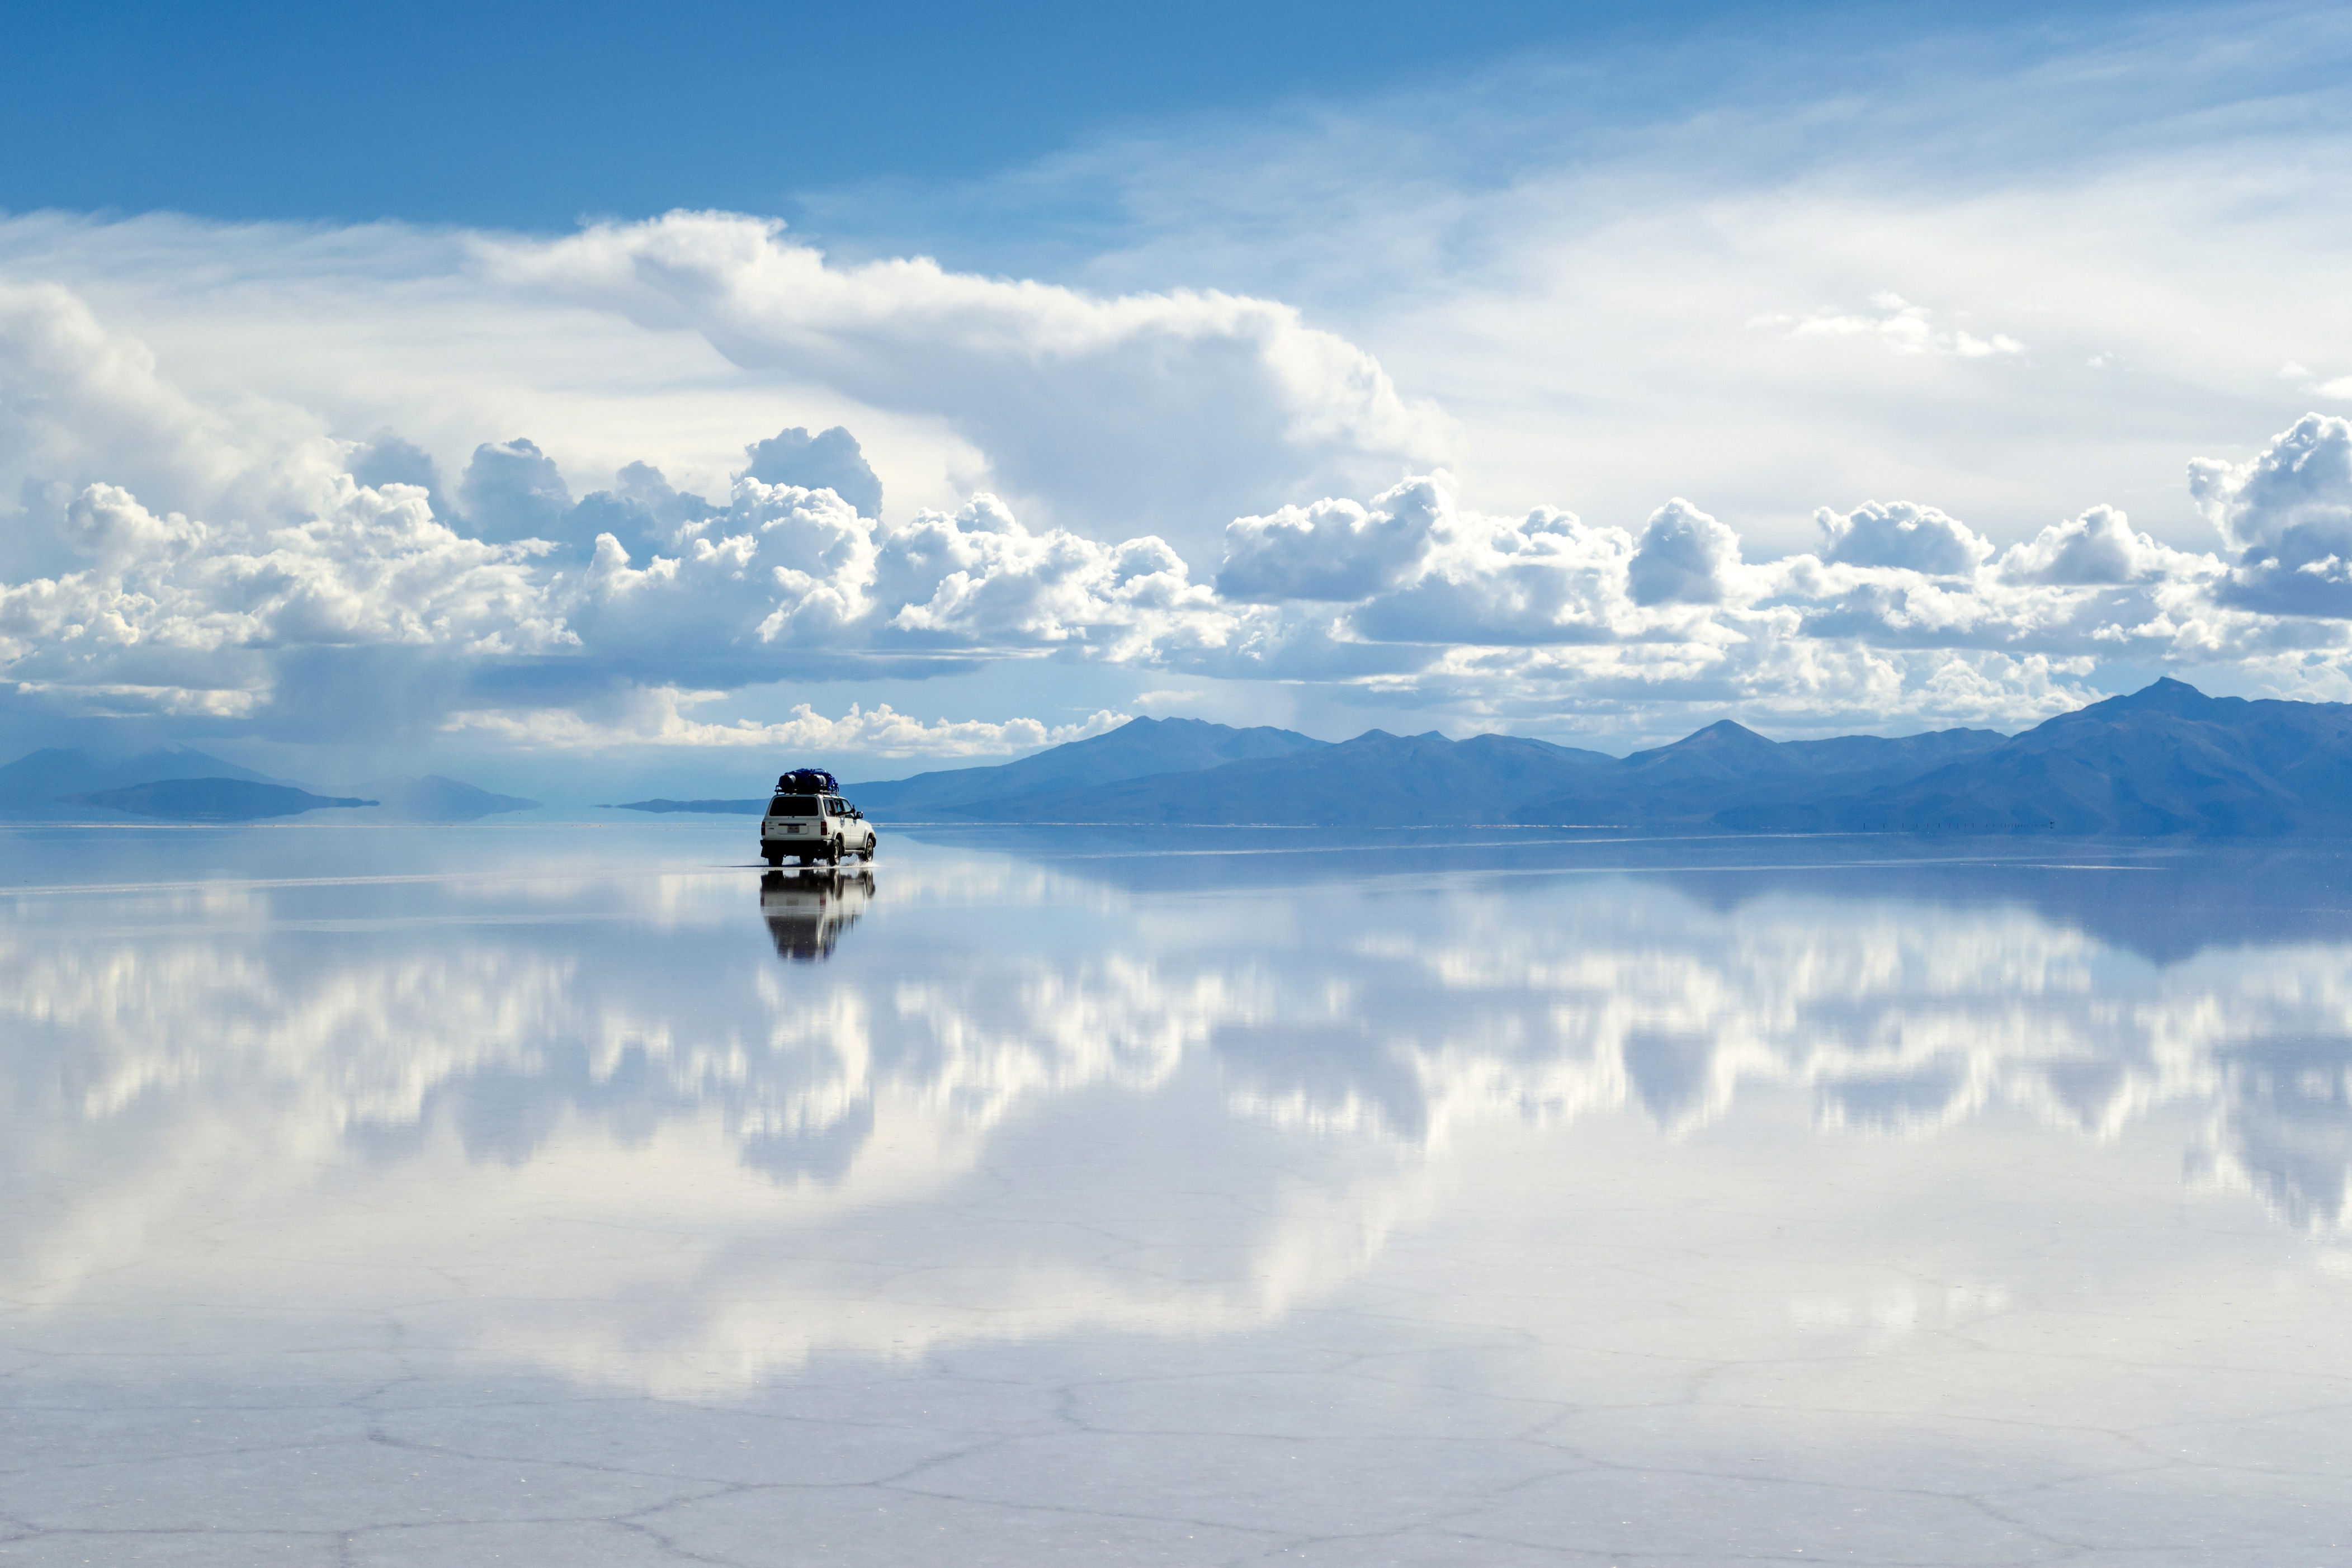 Southwest Bolivia’s Salar de Uyuni is the largest salt flat in the world, and is about as surreal as landscapes come. When dry, the flat is a sheet of blindingly white salt tiles. During the wet season, the shallow lake mirrors the sky, creating a dreamy illusion of infinity.<p>Sign up to receive the latest news, expert tips, and inspiration on all things travel</p><a href="https://www.cntraveler.com/newsletter/the-daily?sourceCode=msnsend">Inspire Me</a>